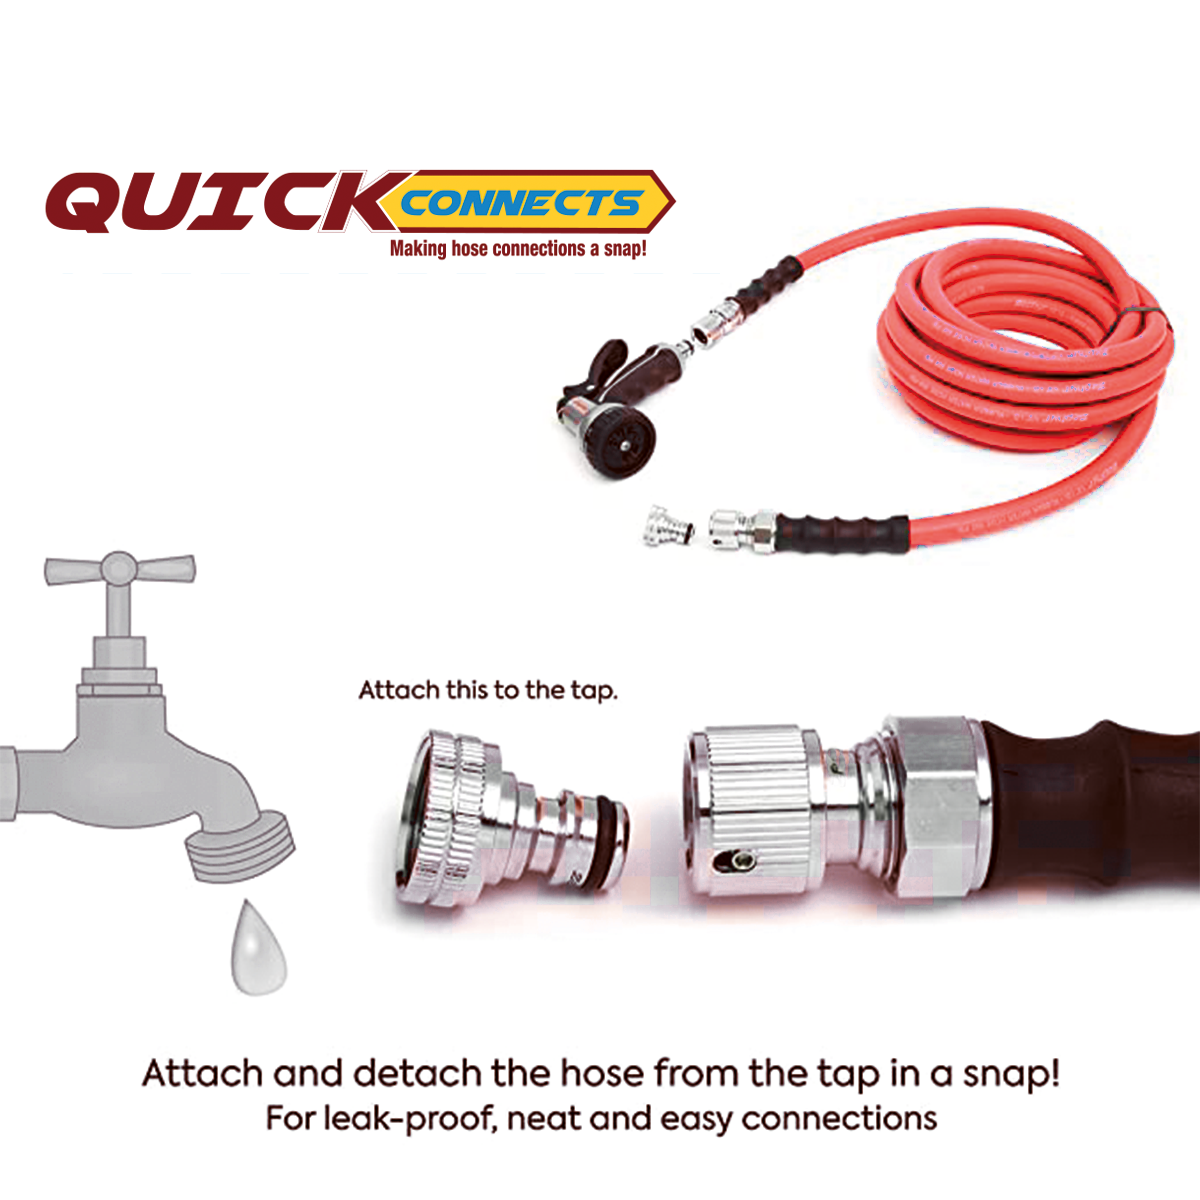 Avagard 3/4" Male GHT Universal Quick-Connect Coupler